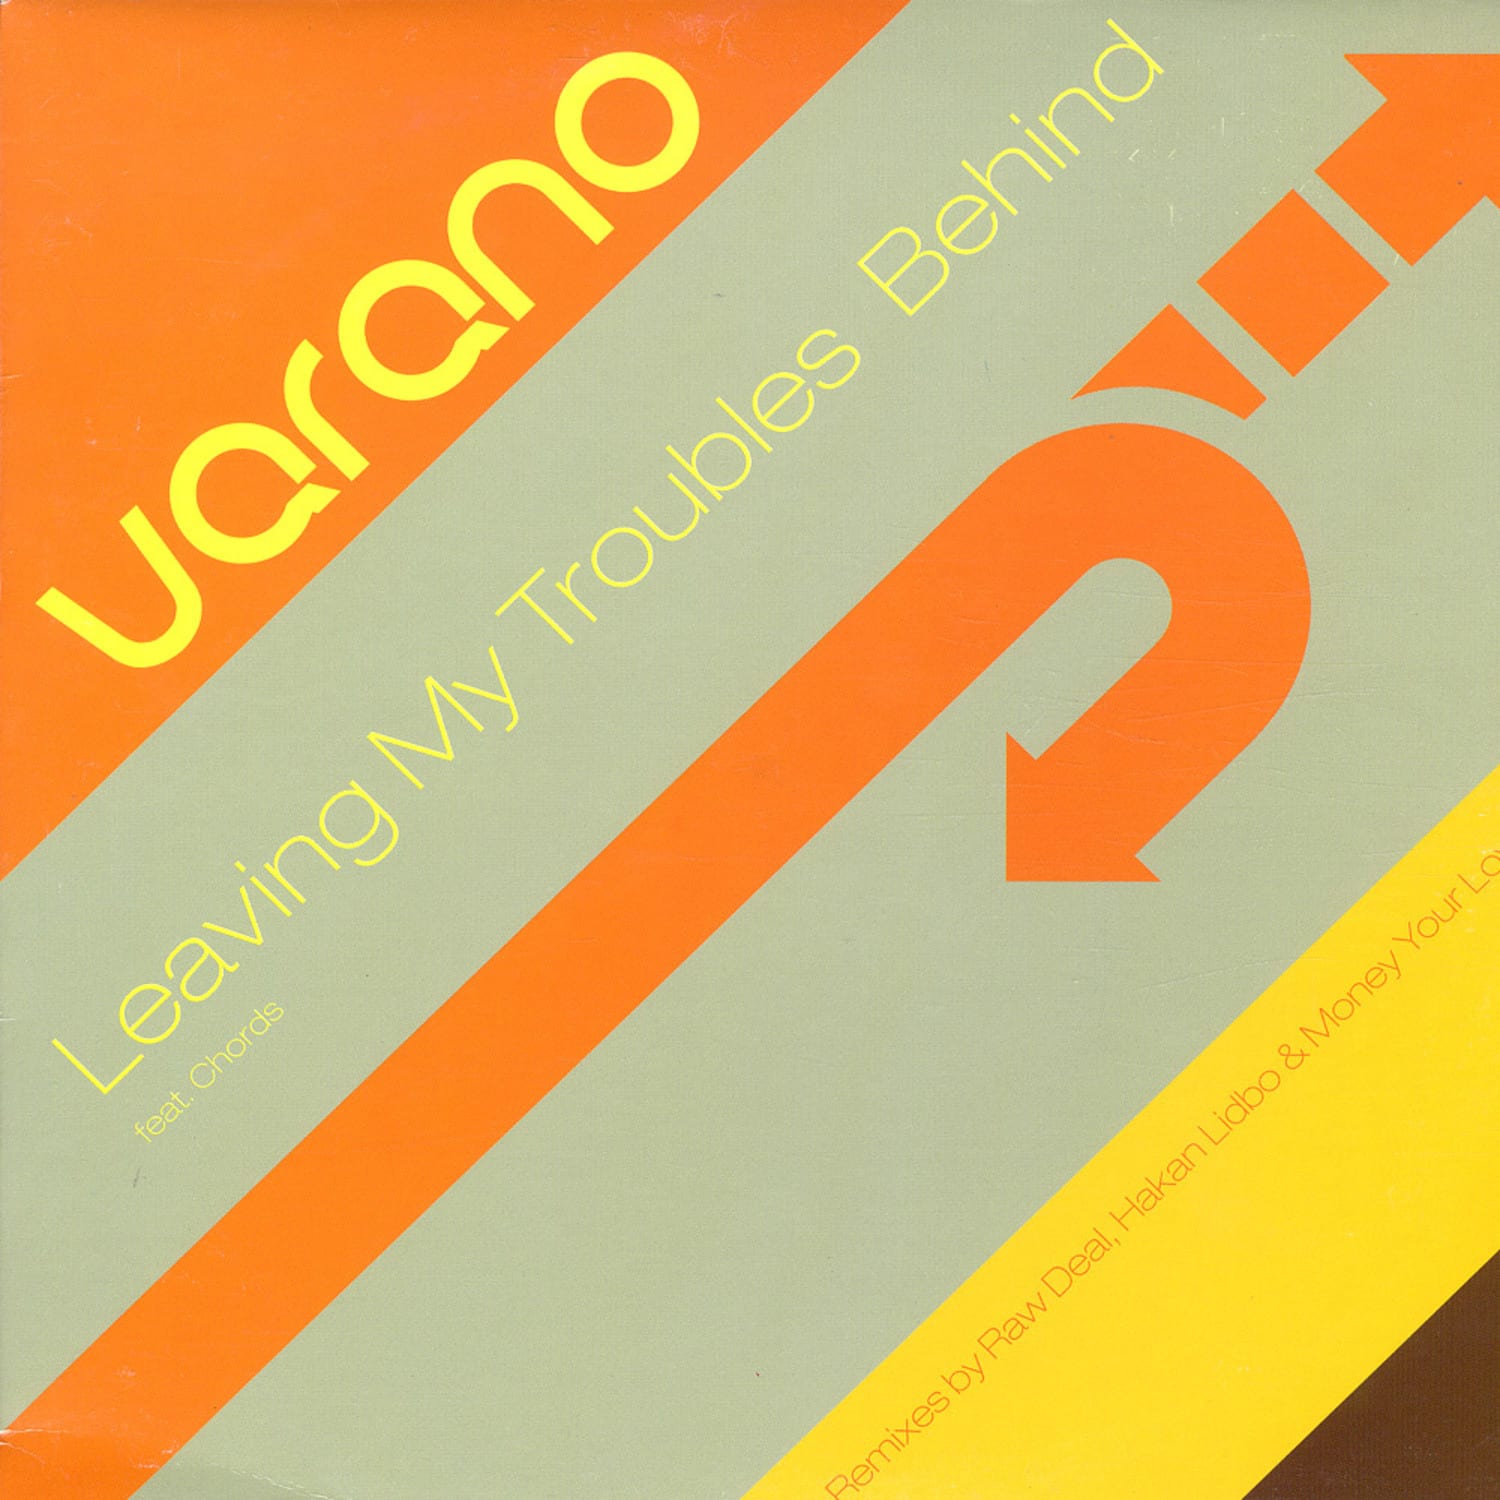 Puddo Varano - LEAVING MY TROUBLES BEHIND